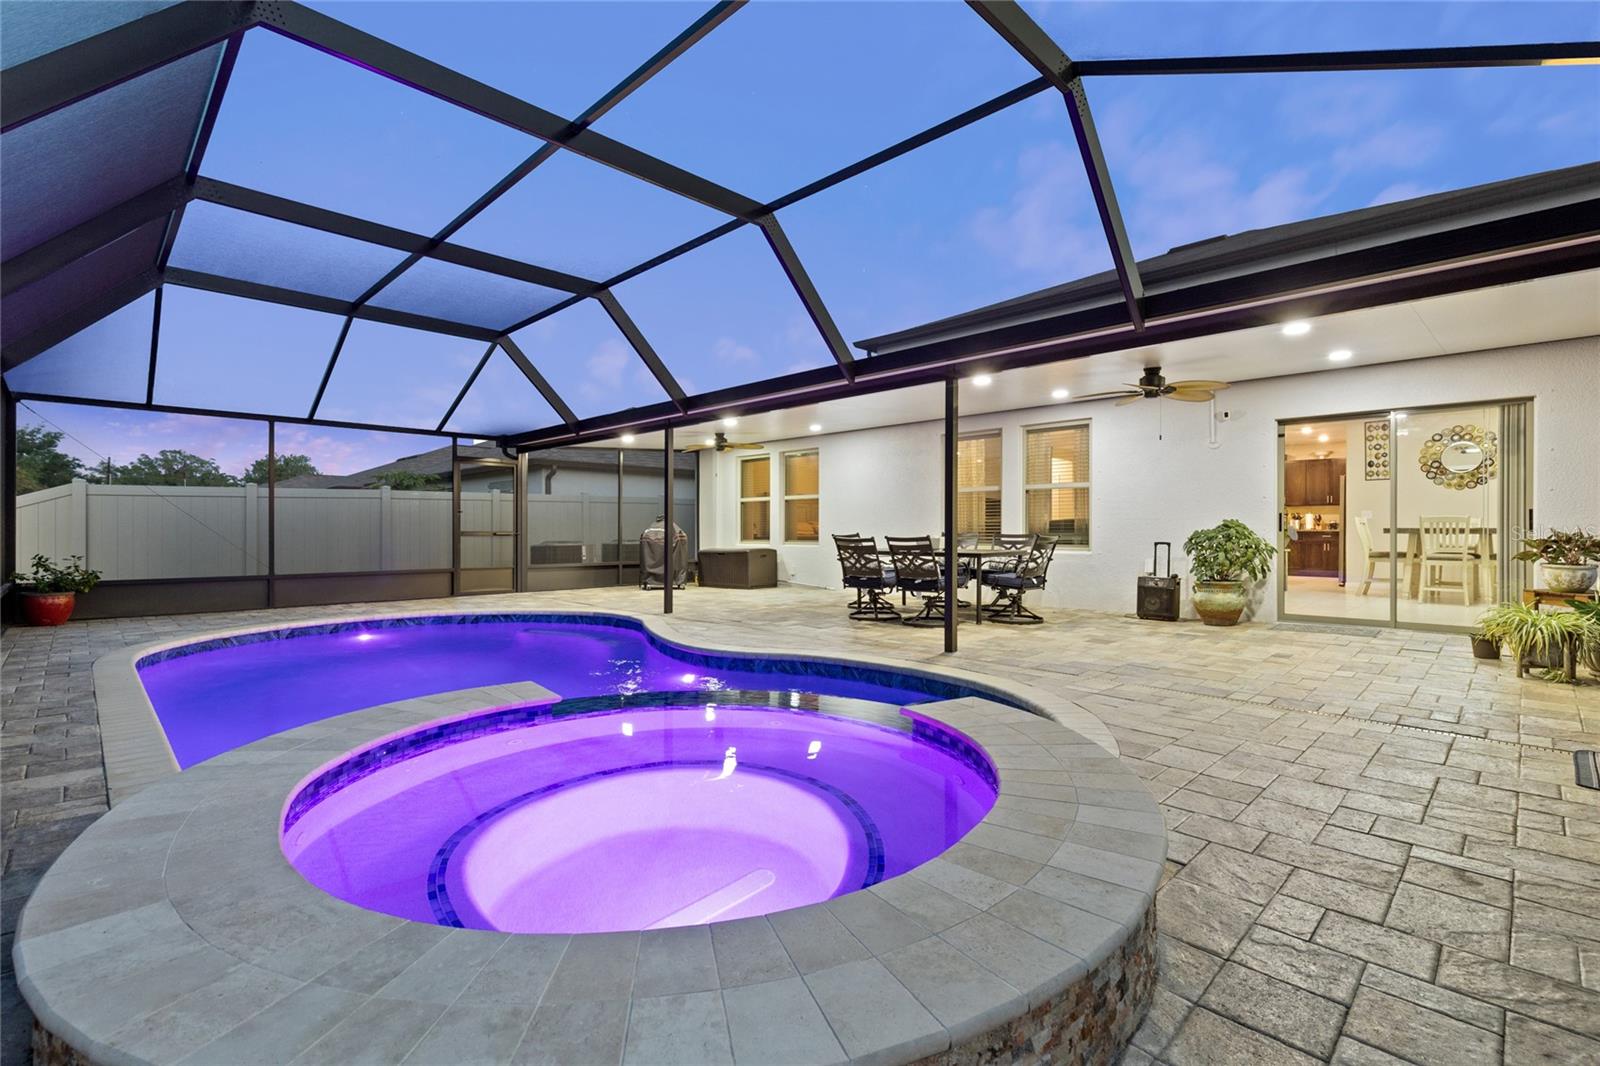 Beautiful covered patio and caged pool area